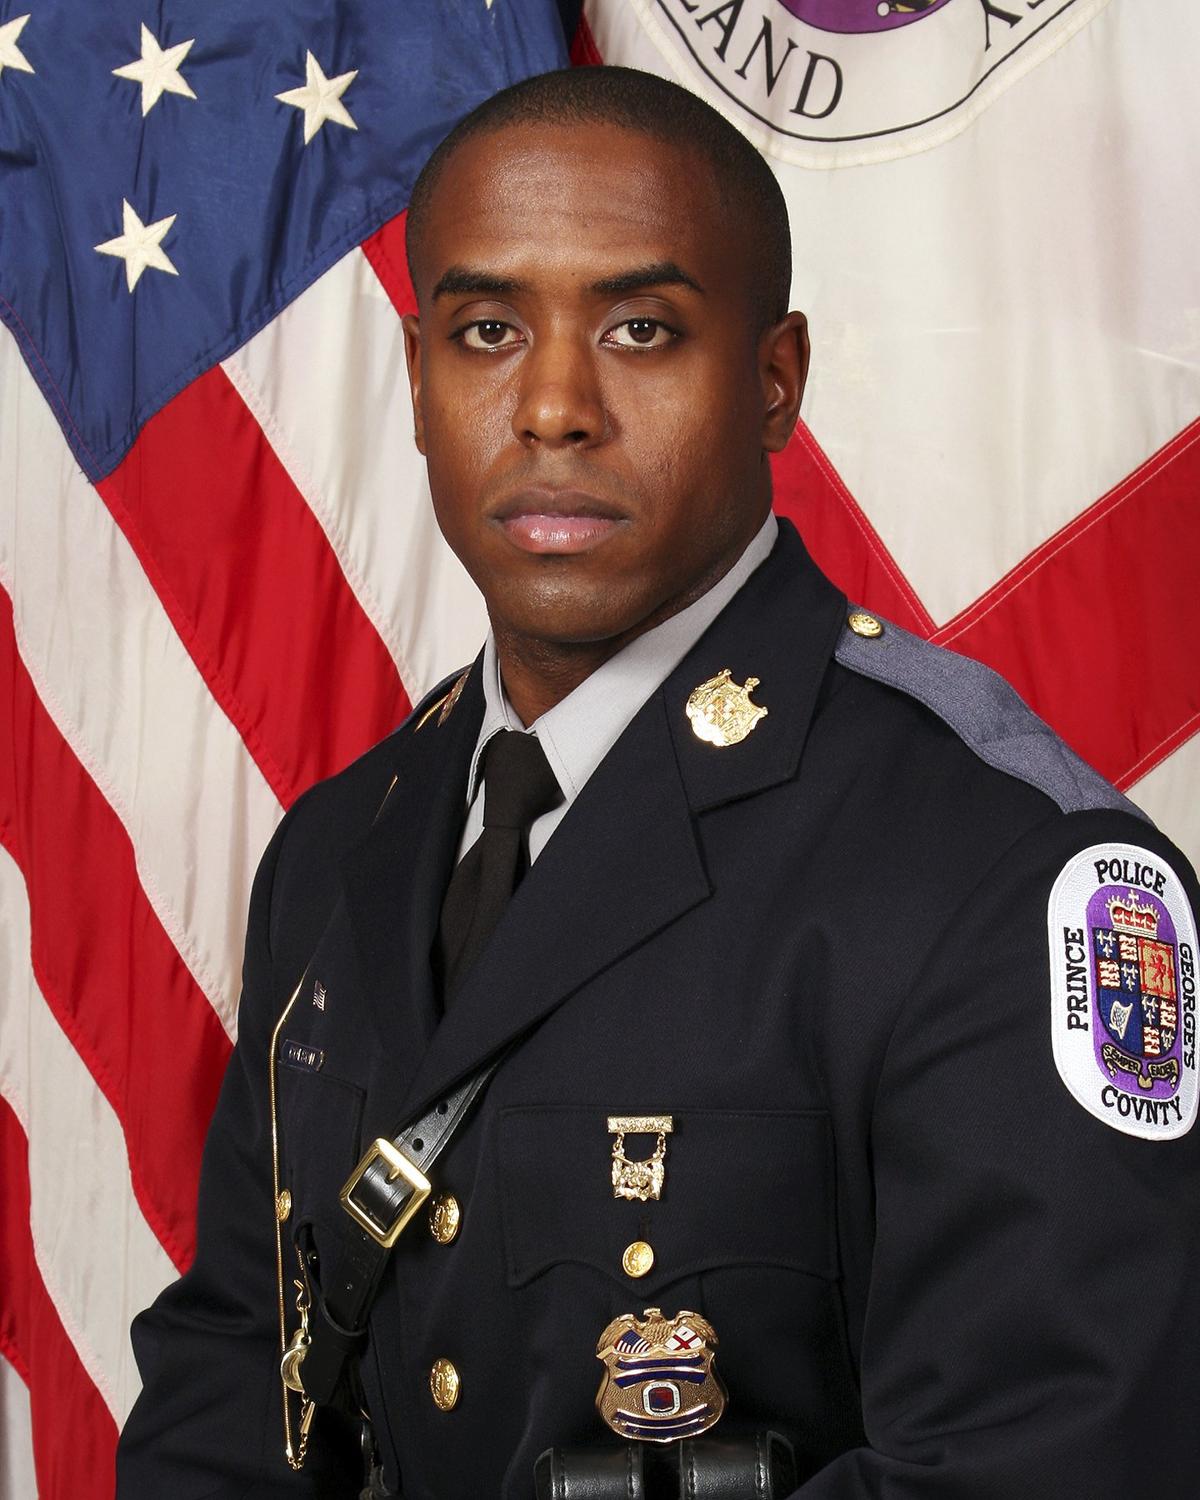 This undated file image provided by the Prince George's County Police Department shows slain officer Jacai Colson. (Prince George's County Police Department via AP)